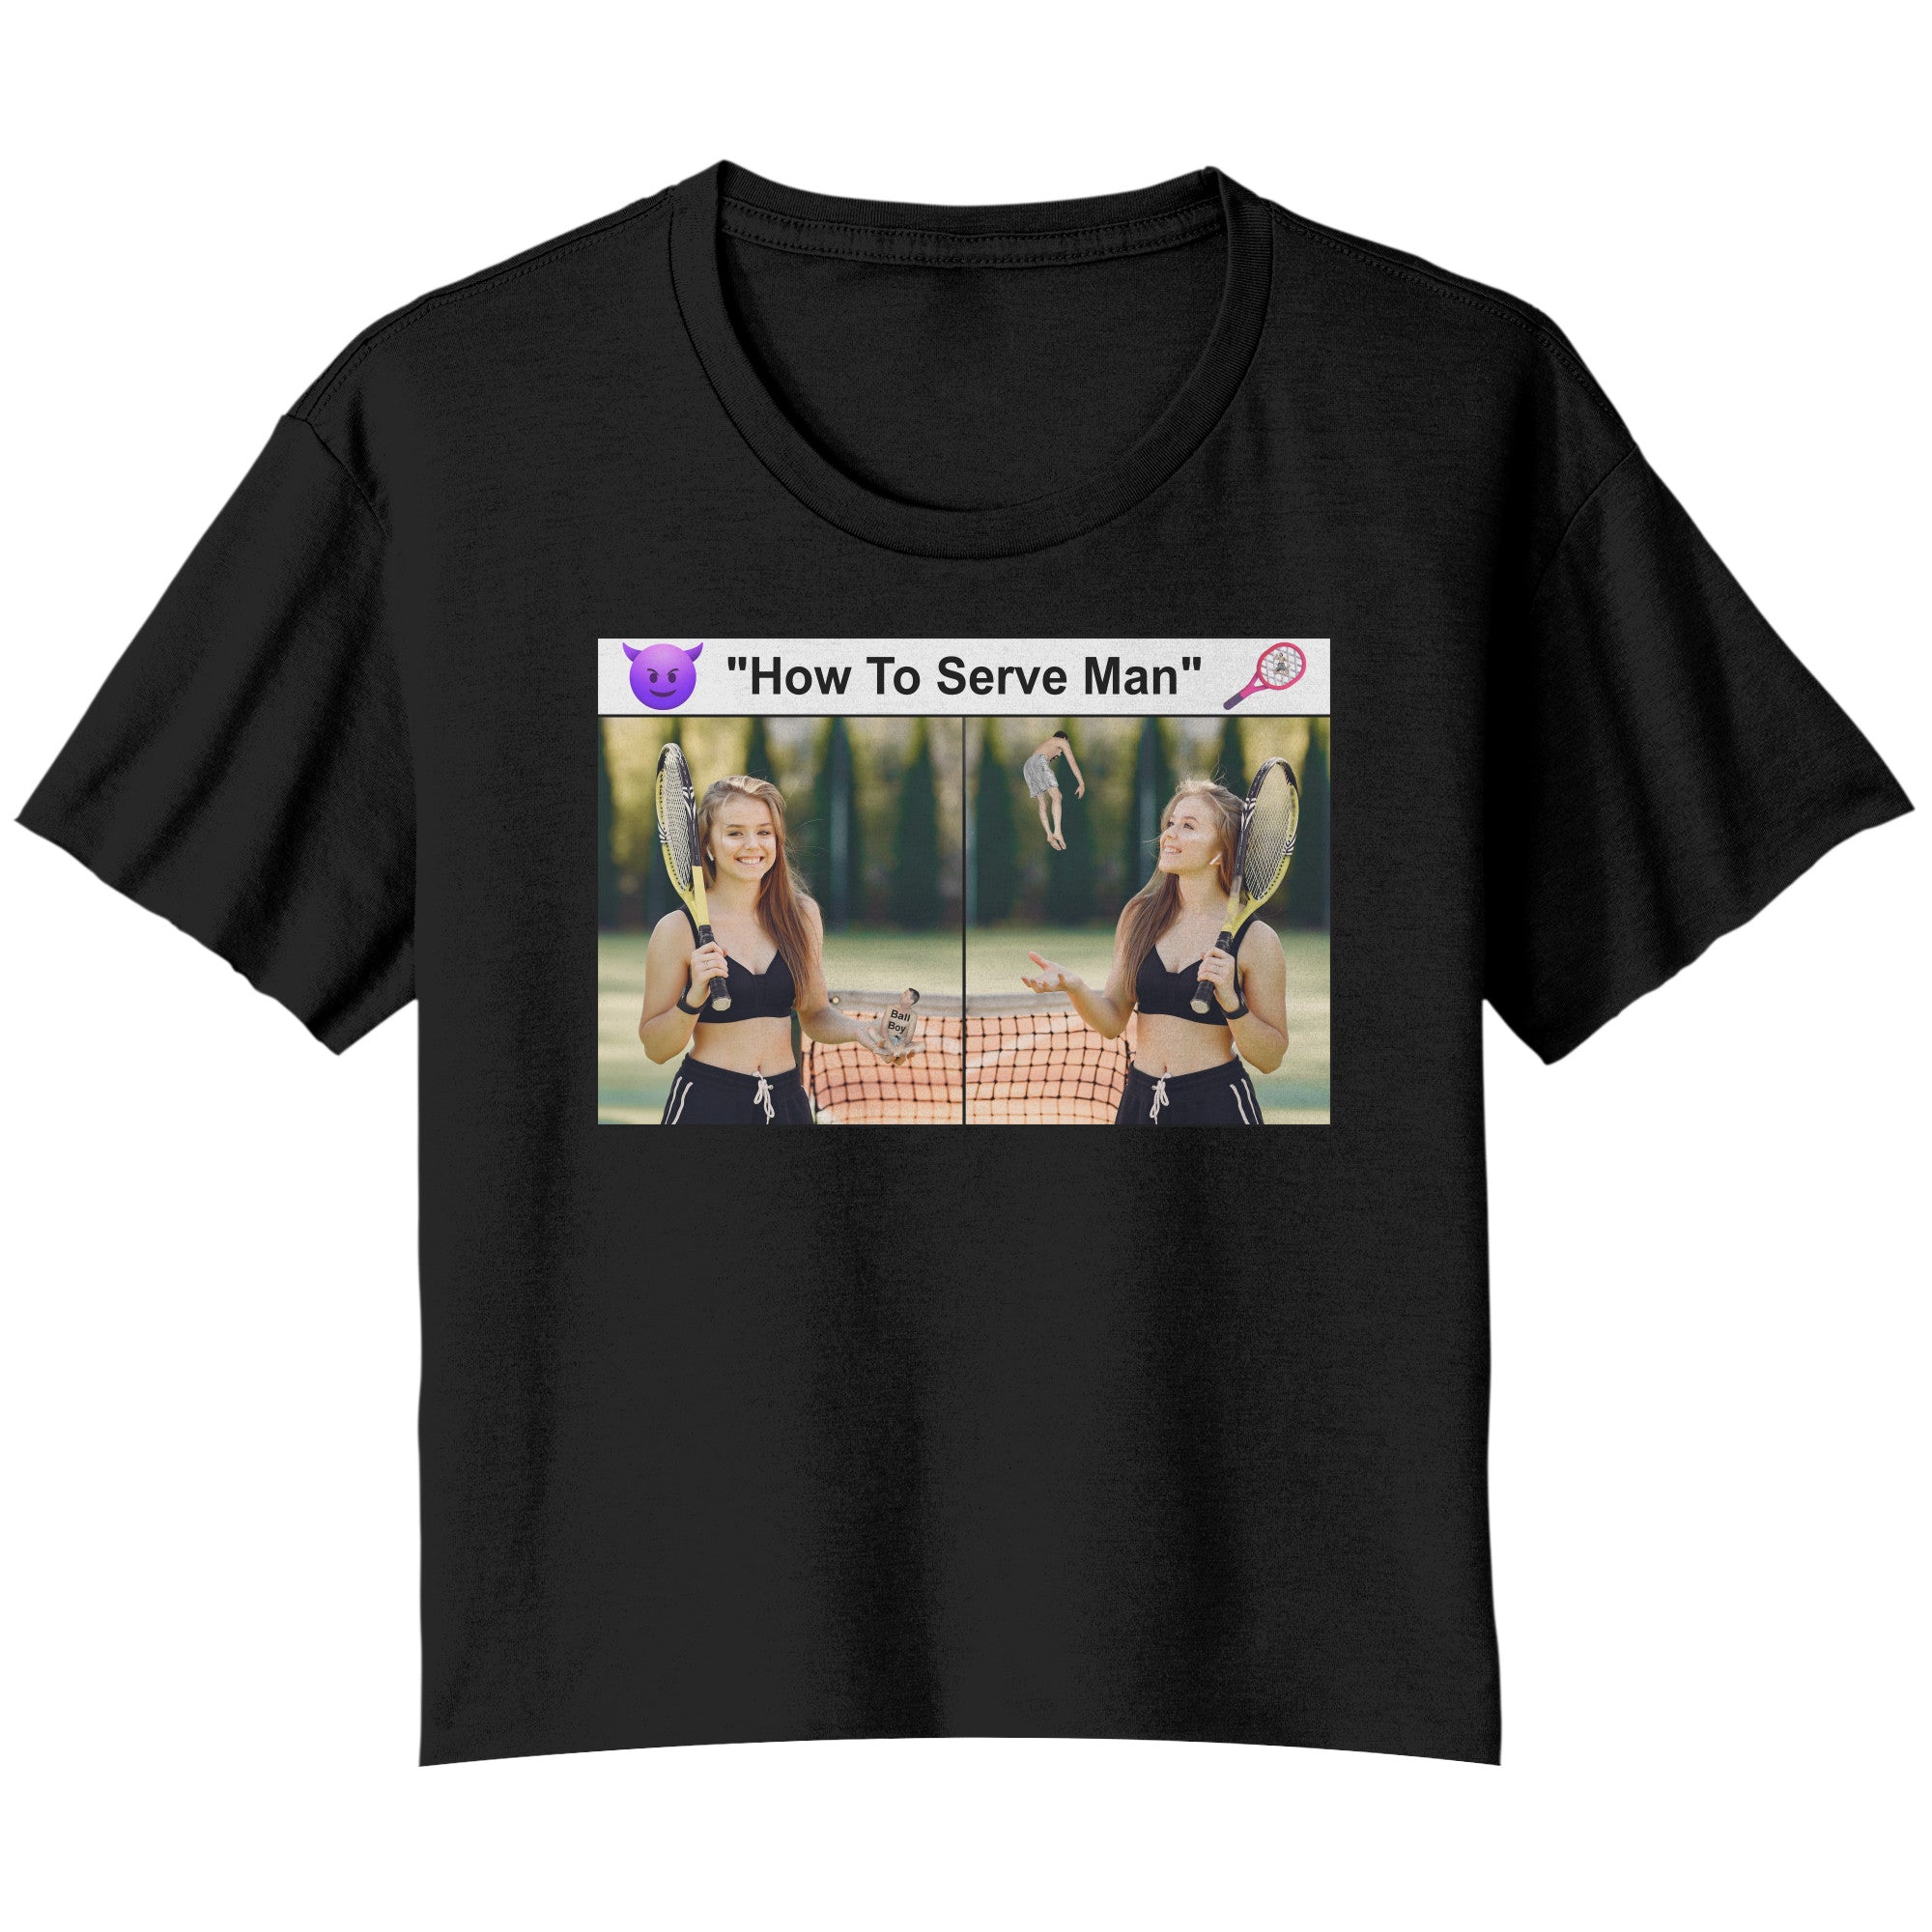 empower-her-flowy-crop-t-shirt-humorous-meme-how-to-serve-man-black-front-mockup